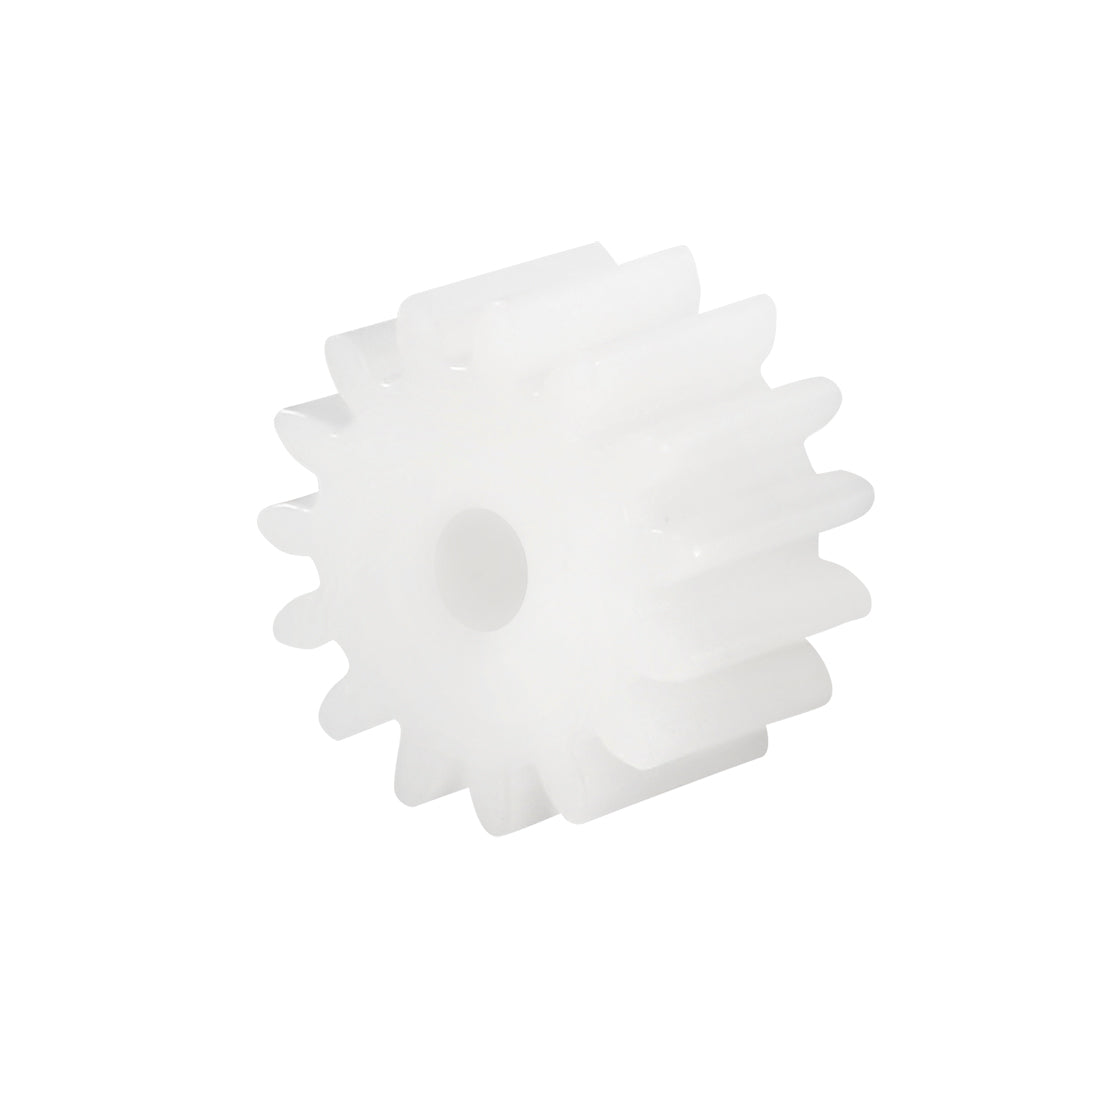 uxcell Uxcell 40Pcs 162A Plastic Gear Accessories with 16 Teeth for DIY Car Robot Motor